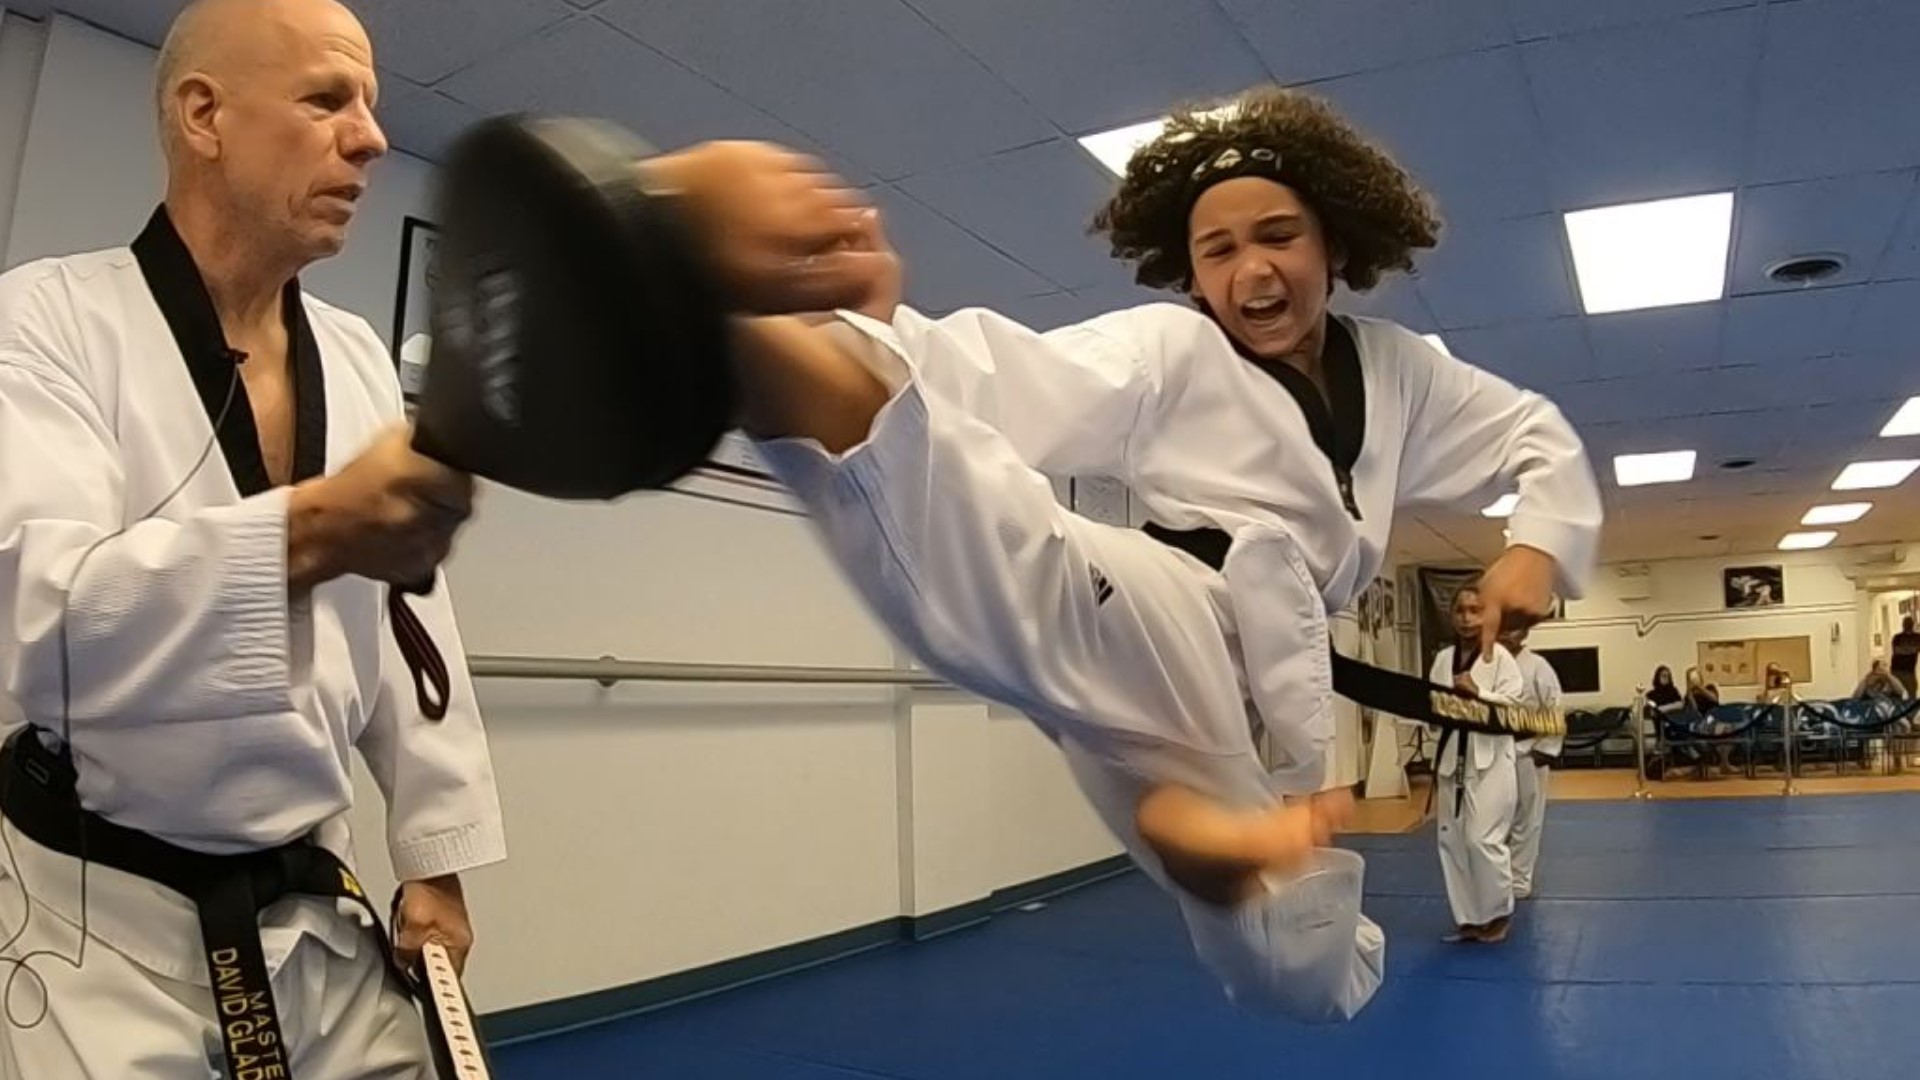 Joshua Aguirre, 9, of Lebanon, will compete in three different categories in the U.S. Taekwondo Junior Olympics, held in Houston from July 28 to August 7.